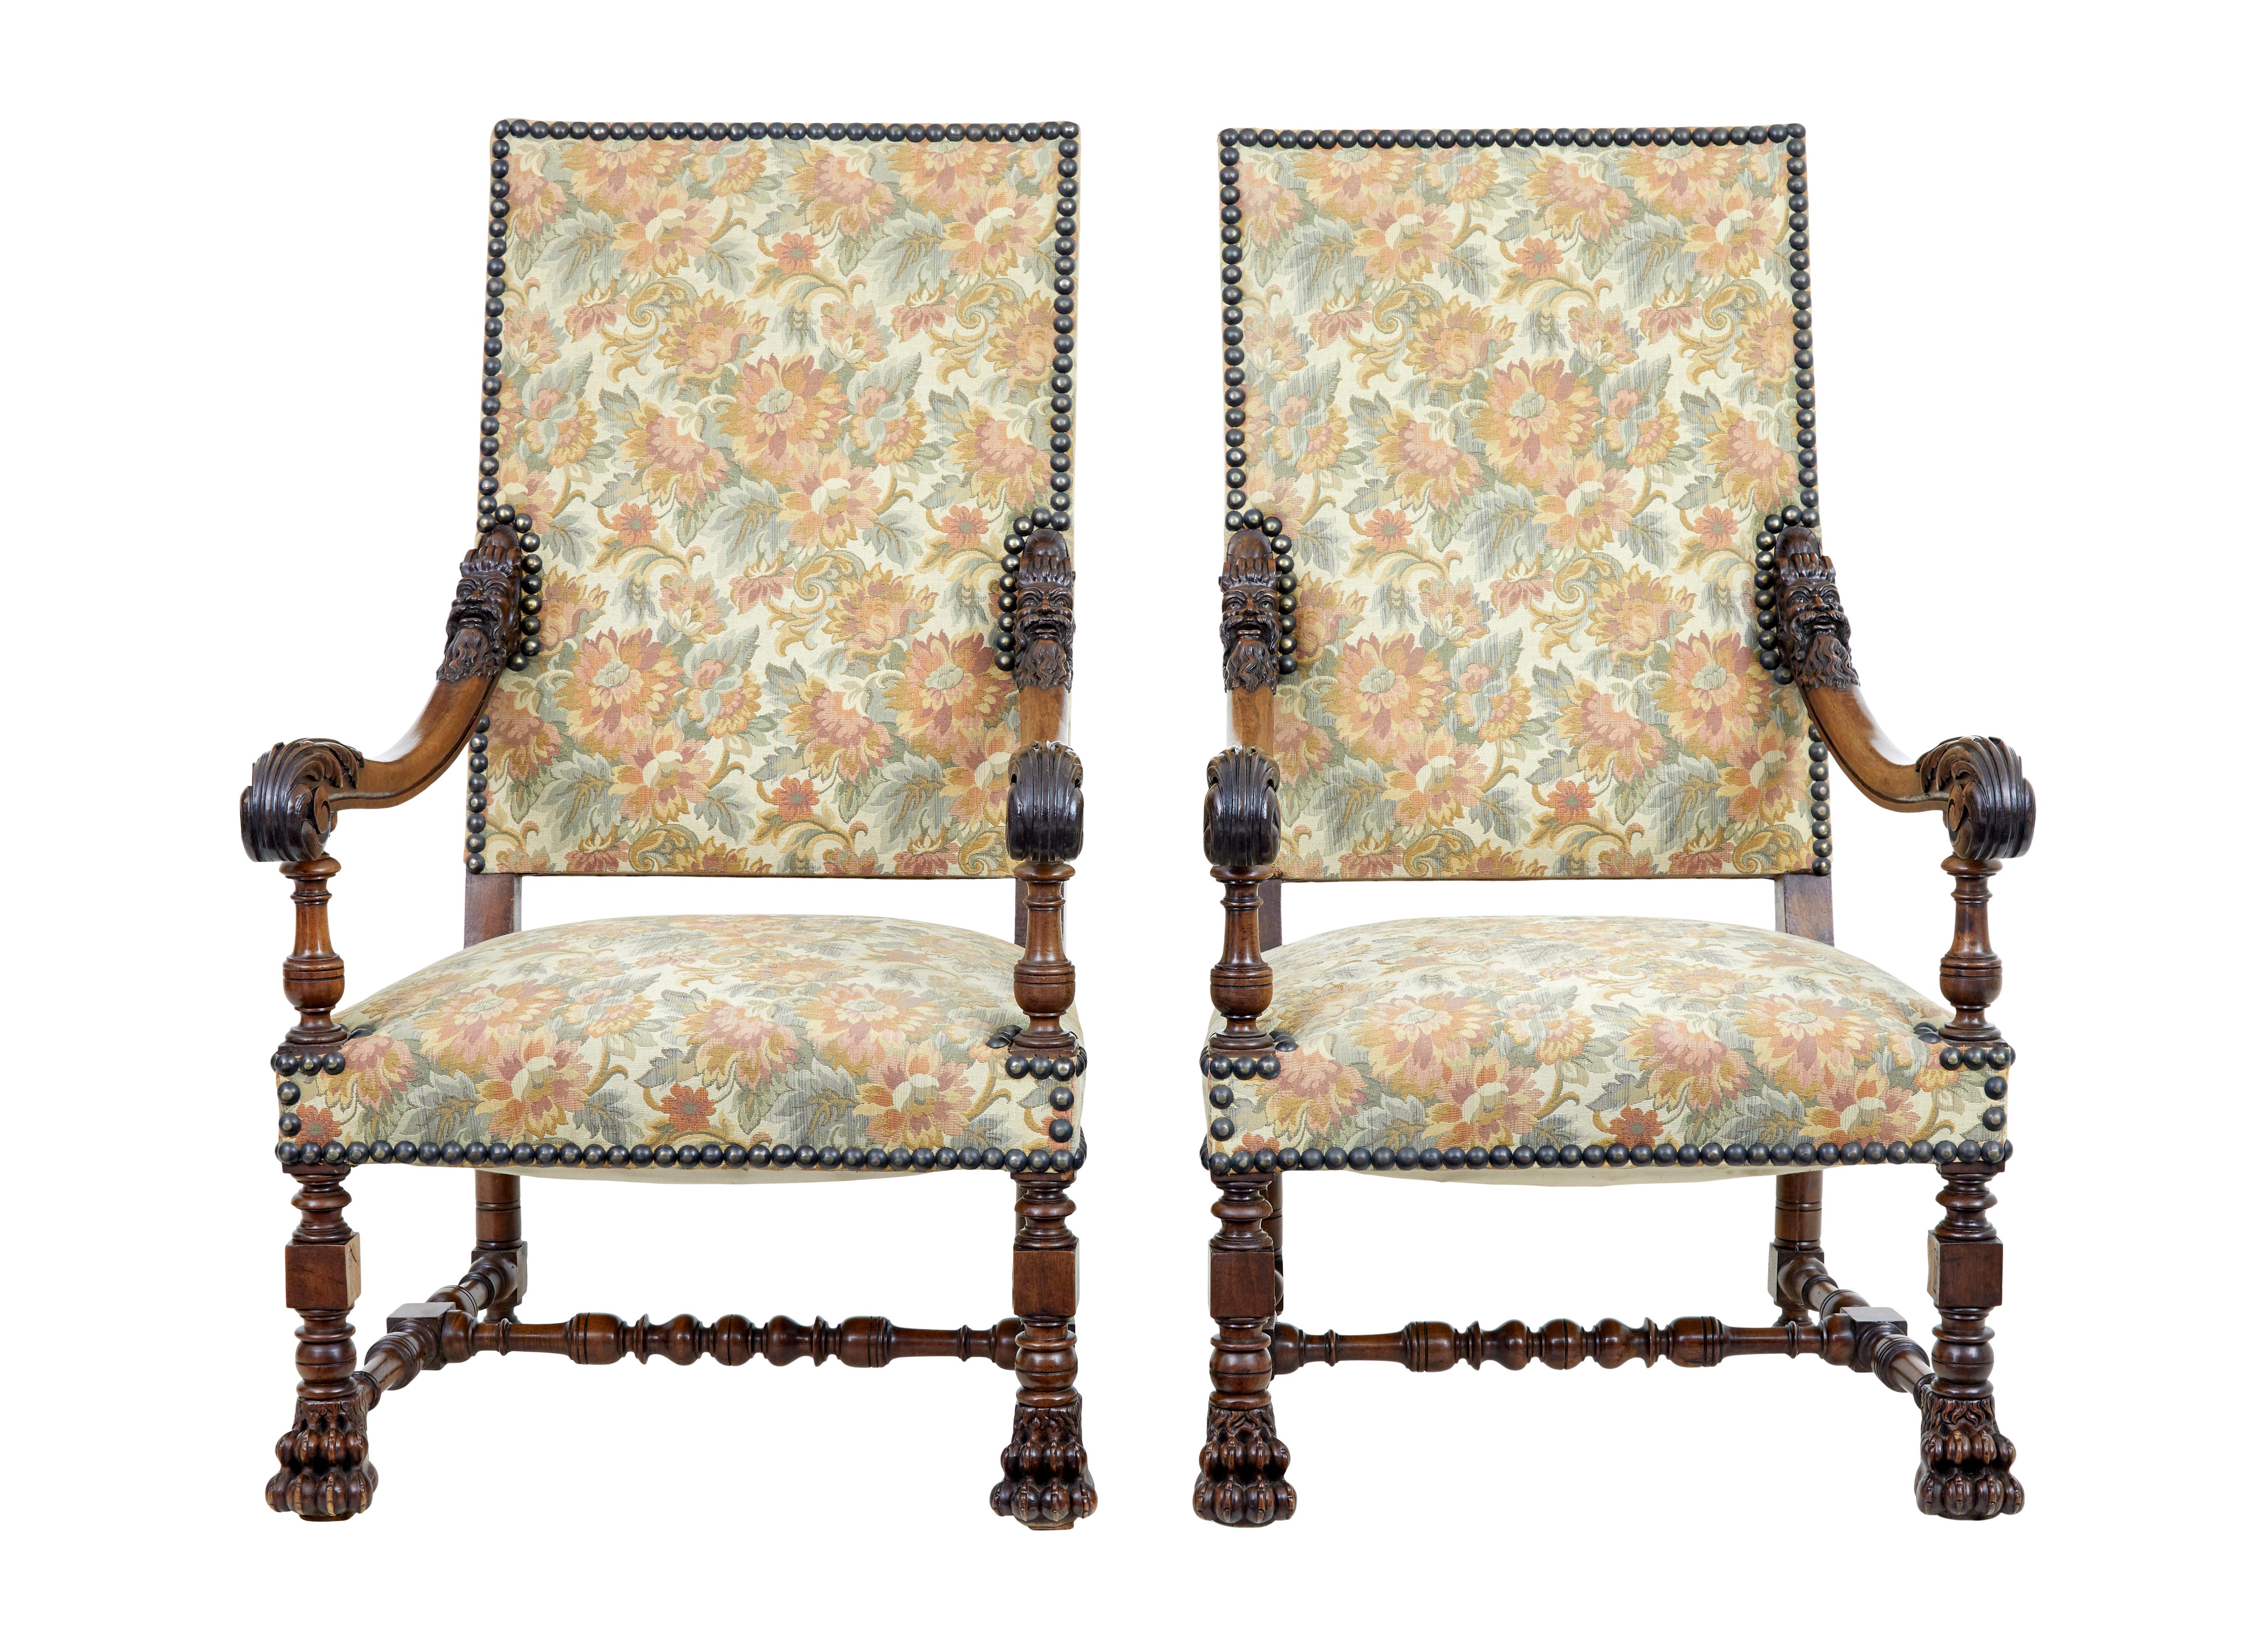 Fine pair of 19th century french carved walnut armchairs circa 1870.

Beautifully carved pair of french armchairs of good large proportions. Carved mythical heads to the top of each arm, scrolling arms. Standing on lion paw front feet united by